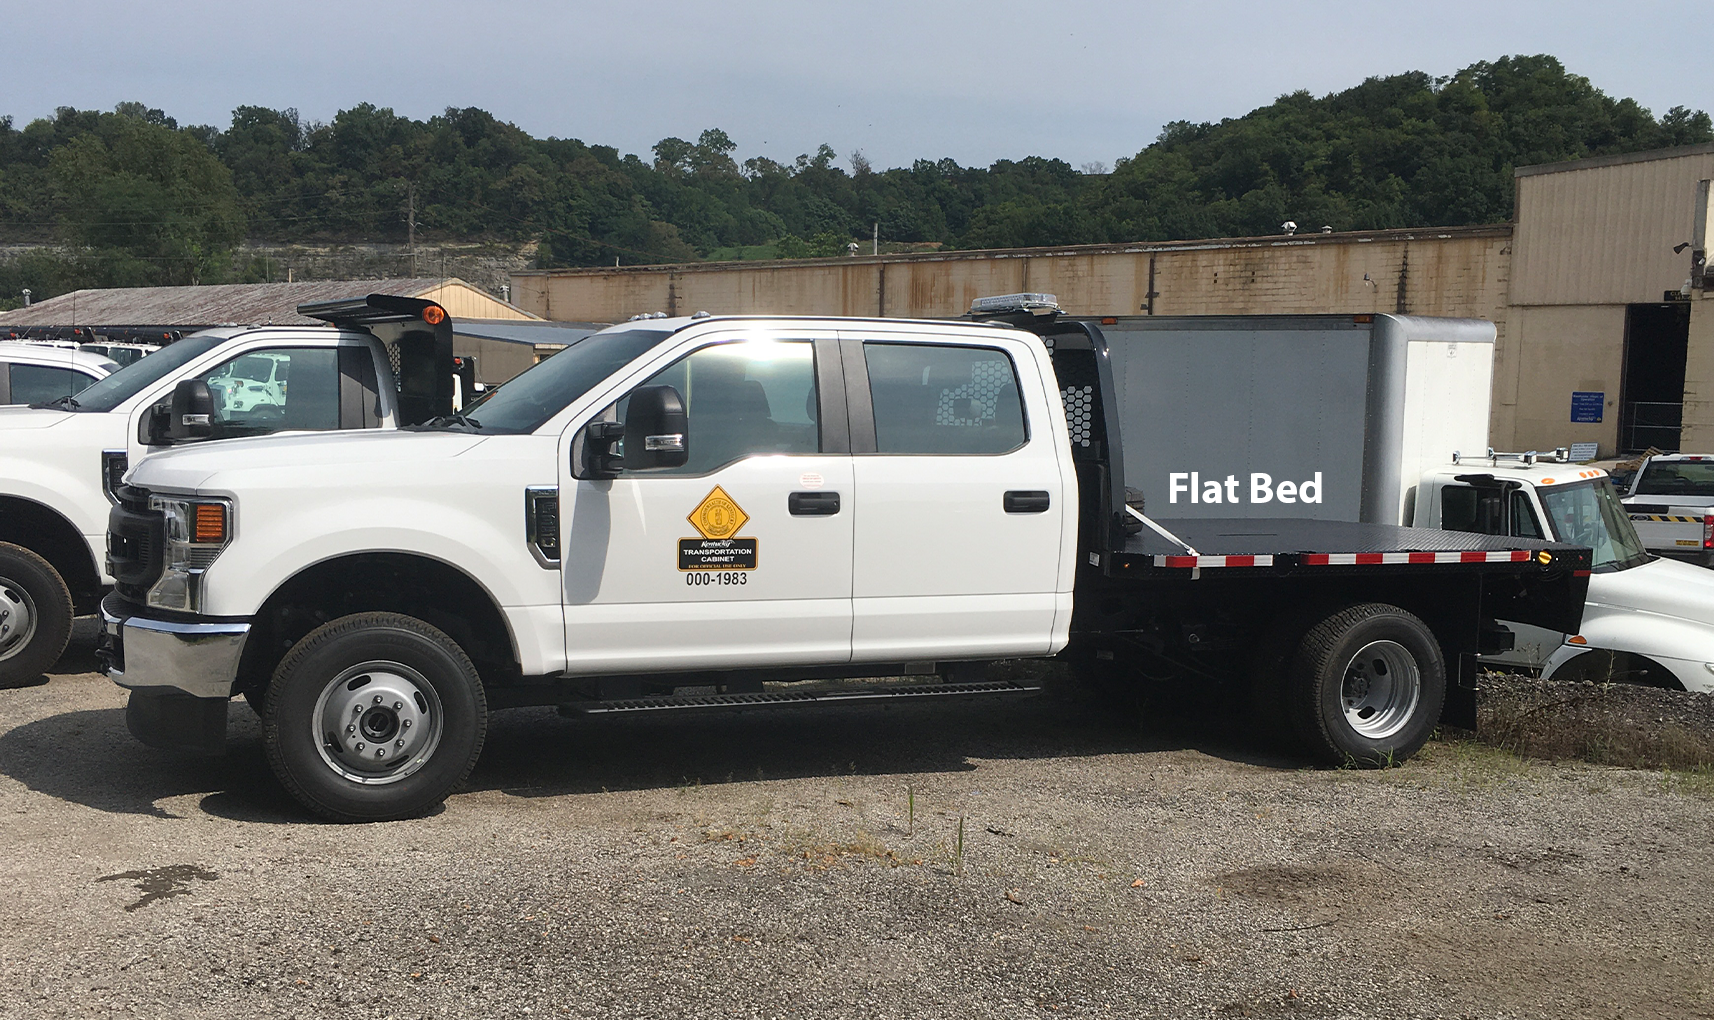 Flatbed Truck Labeled